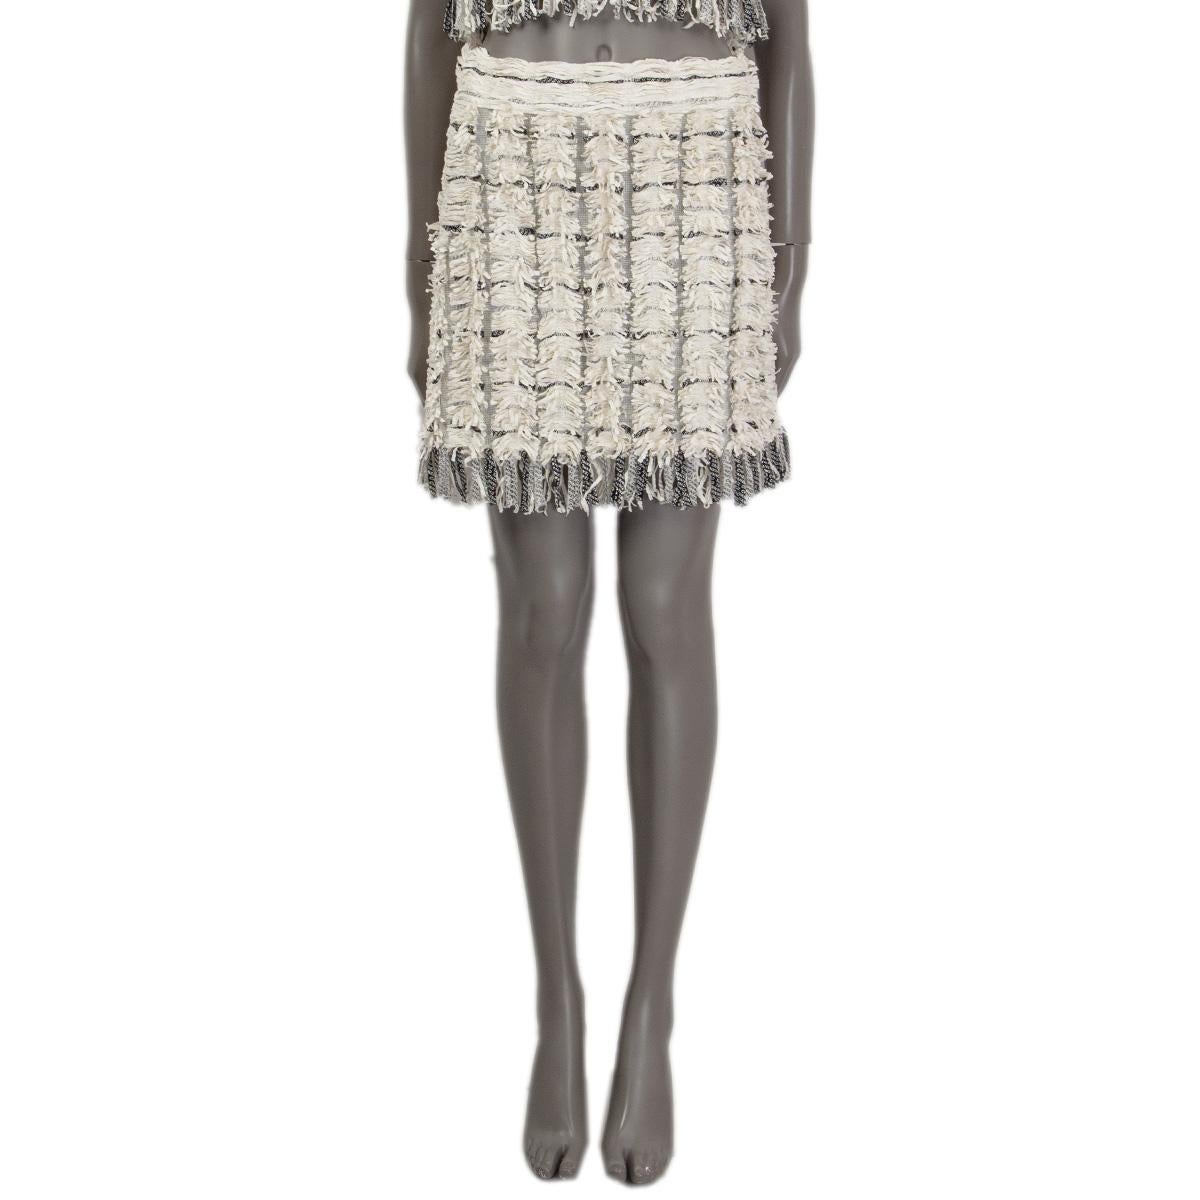 100% authentic Chanel fringed mini skirt from Spring 2018 in white and black viscose (42%) cotton (35%) polyurethane (18%) polyamide (5%). Has fringes all over, elastic fabric, finished off with knotted fringes at the hemline and a CC-logo at the